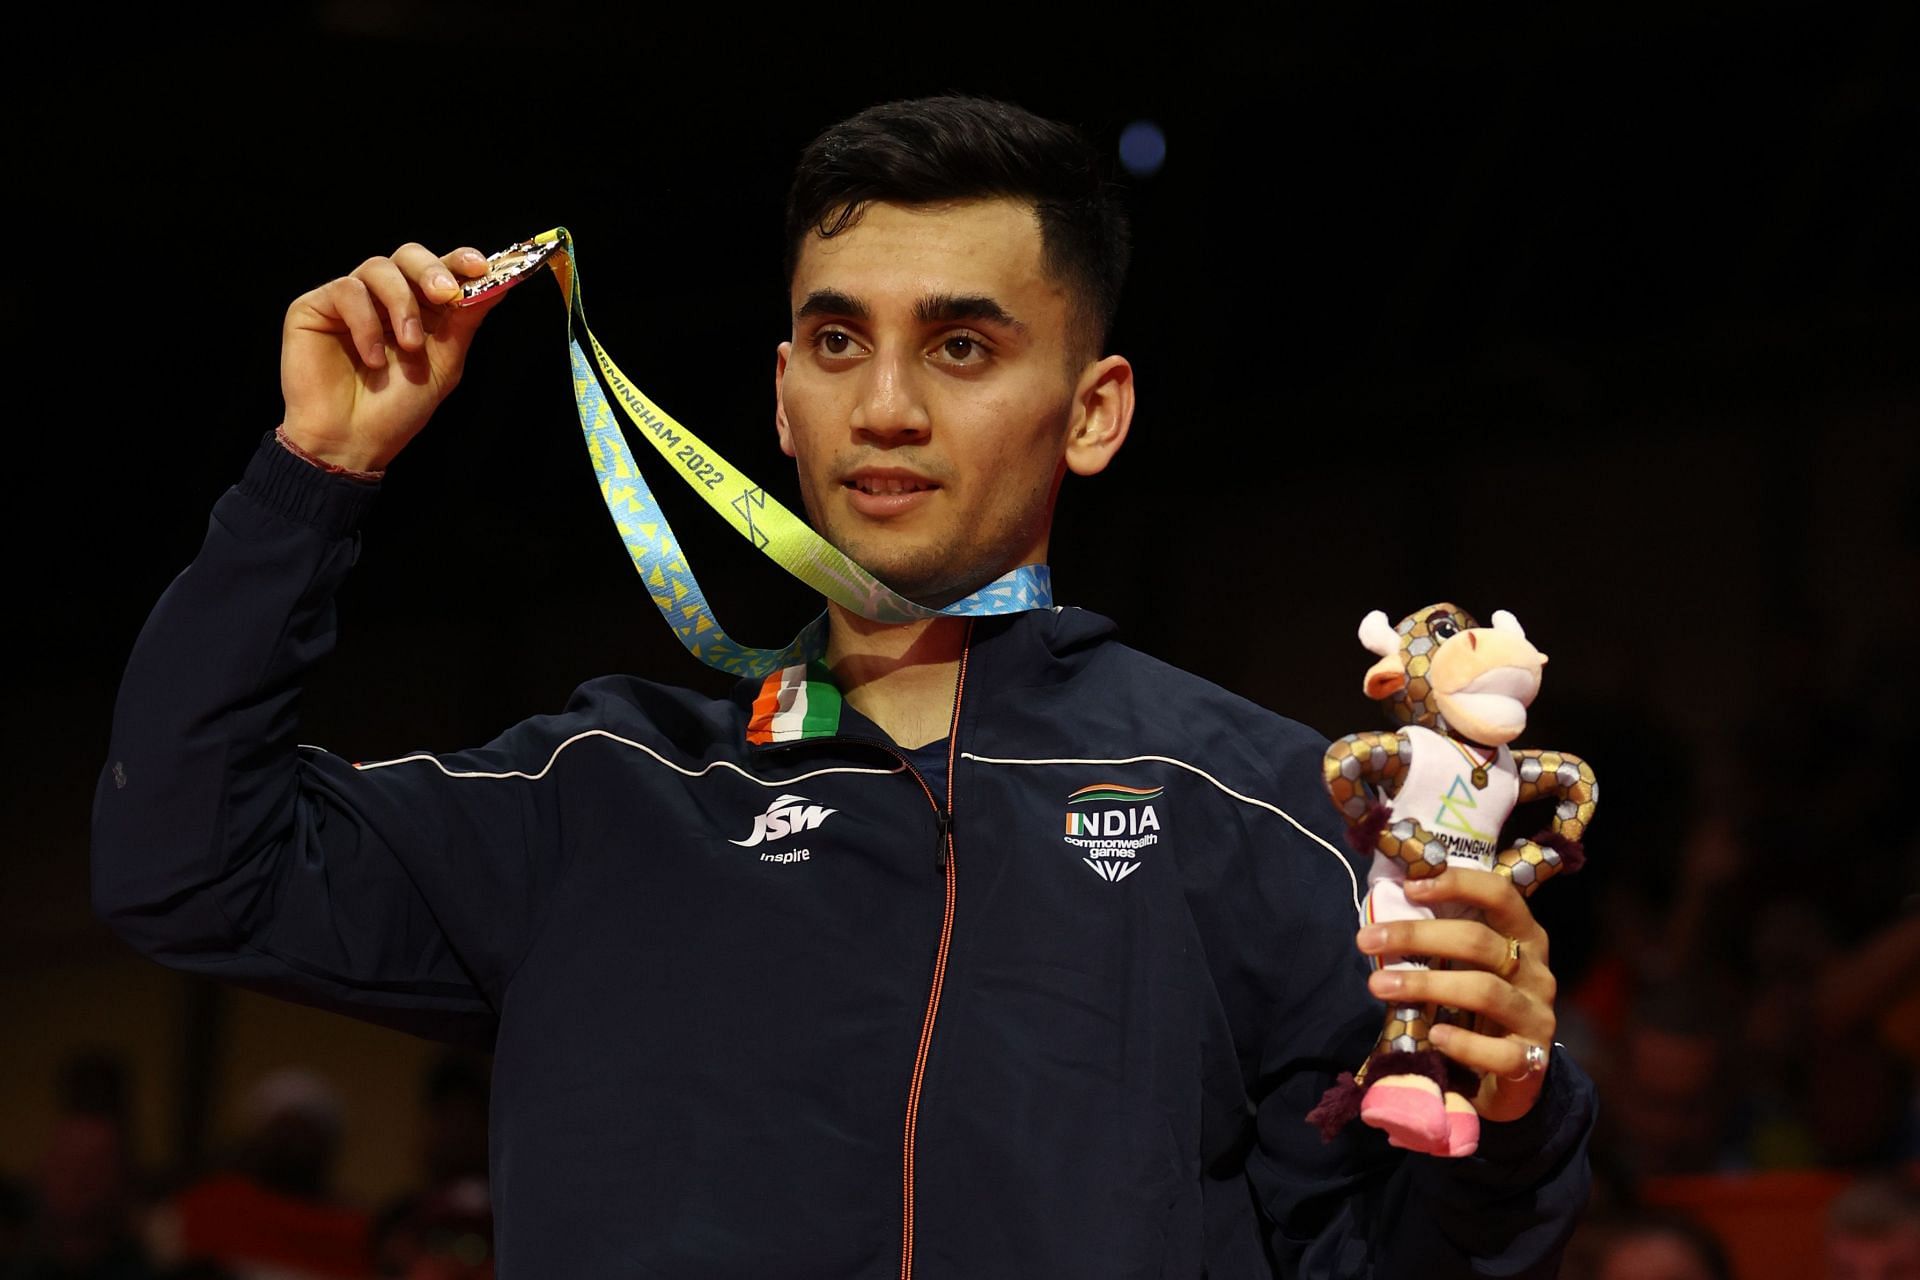 Lakshya Sen flaunts his gold medal at the 2022 Commonwealth Games (Image courtesy: Getty Images)